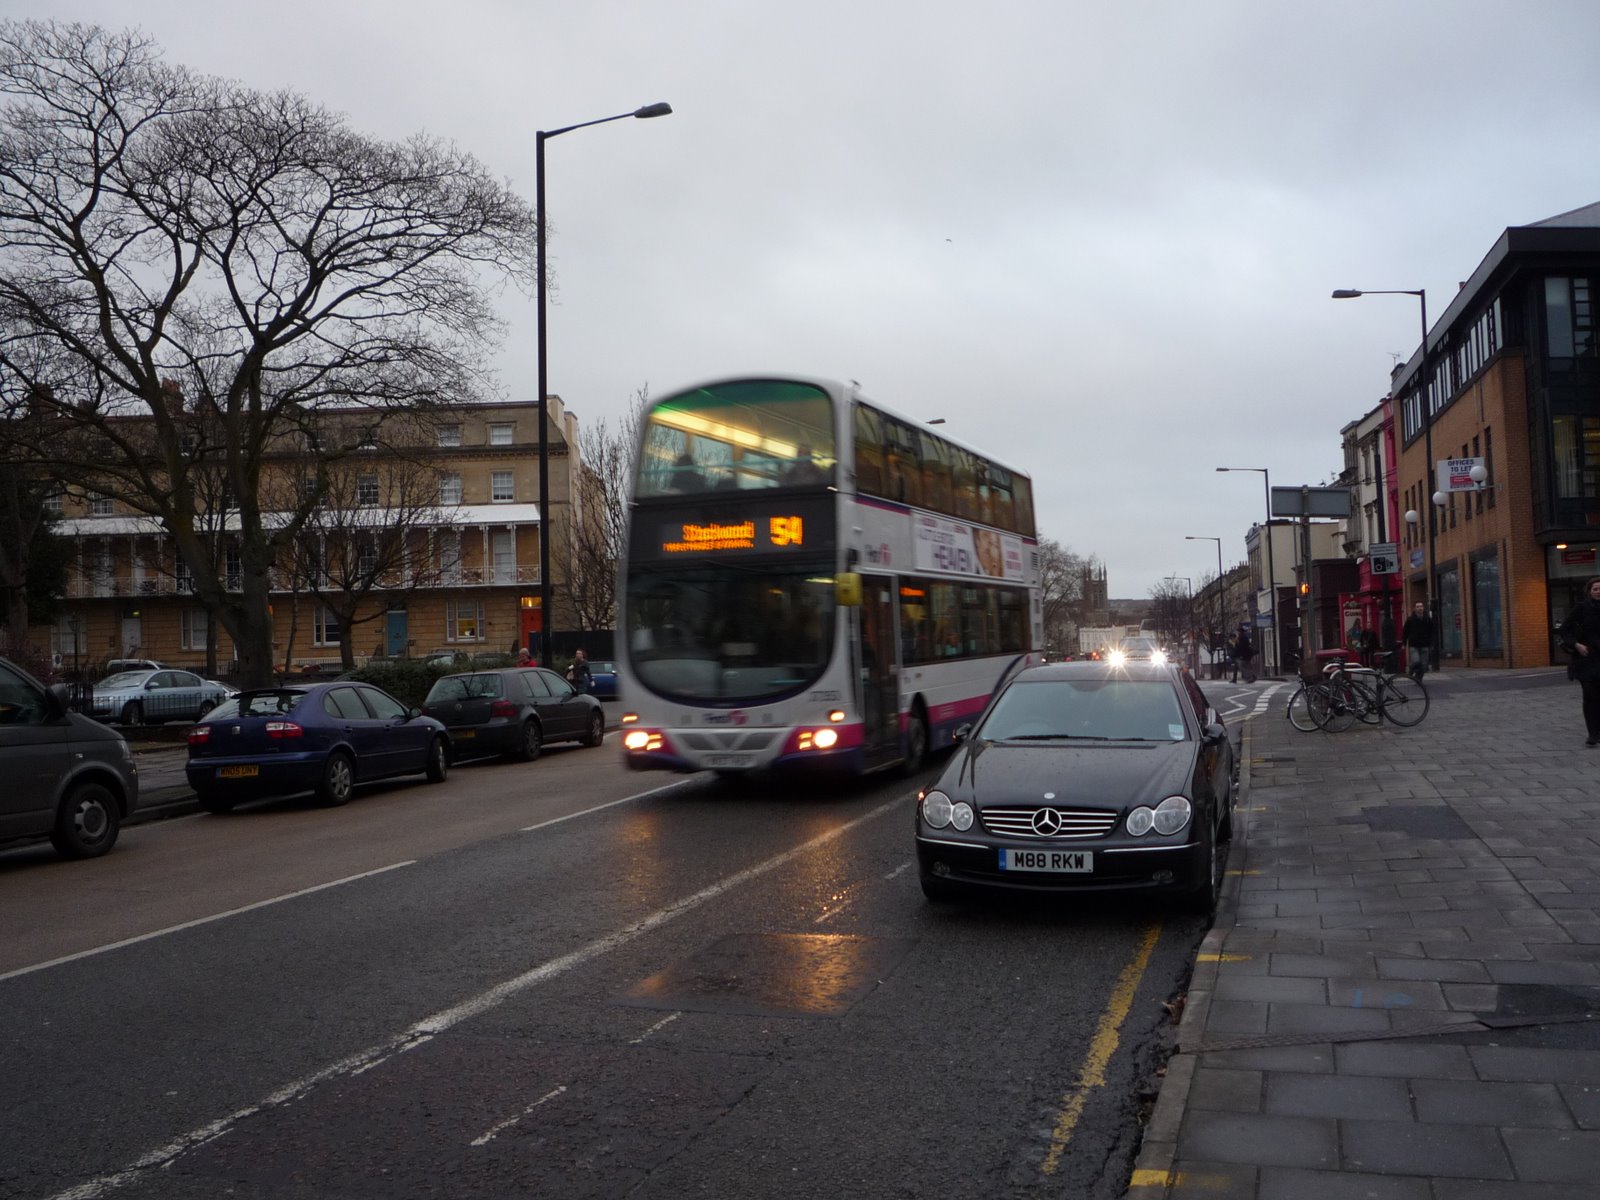 Bristol Traffic: Bus lanes: not even buses use them